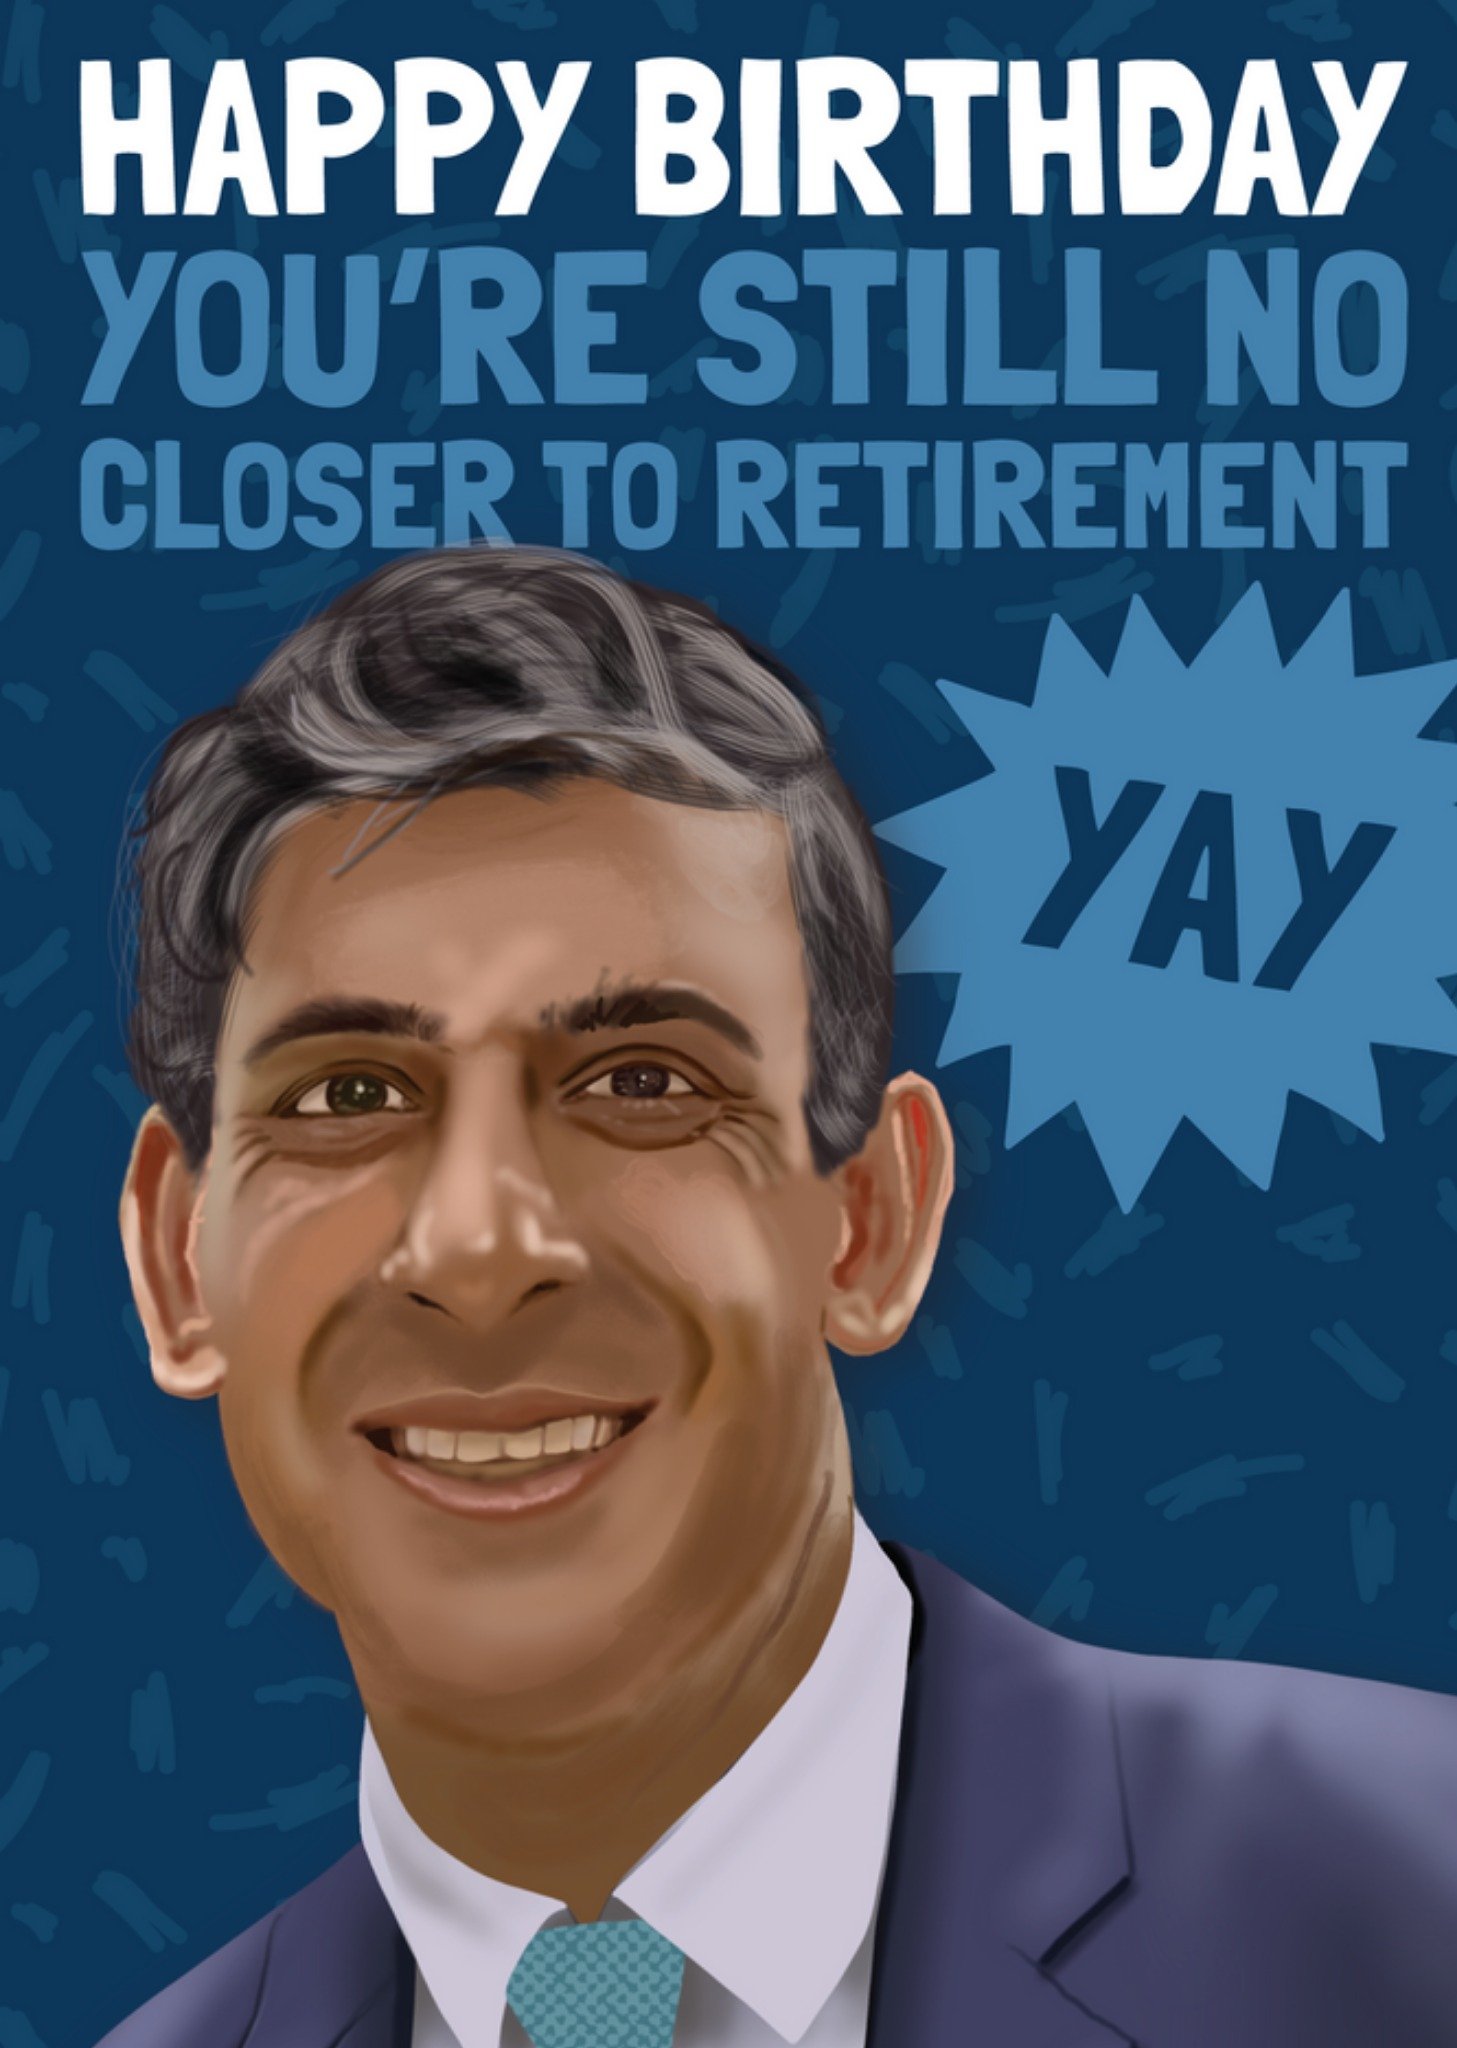 Moonpig You're Still No Closer To Retirement Birthday Card, Large